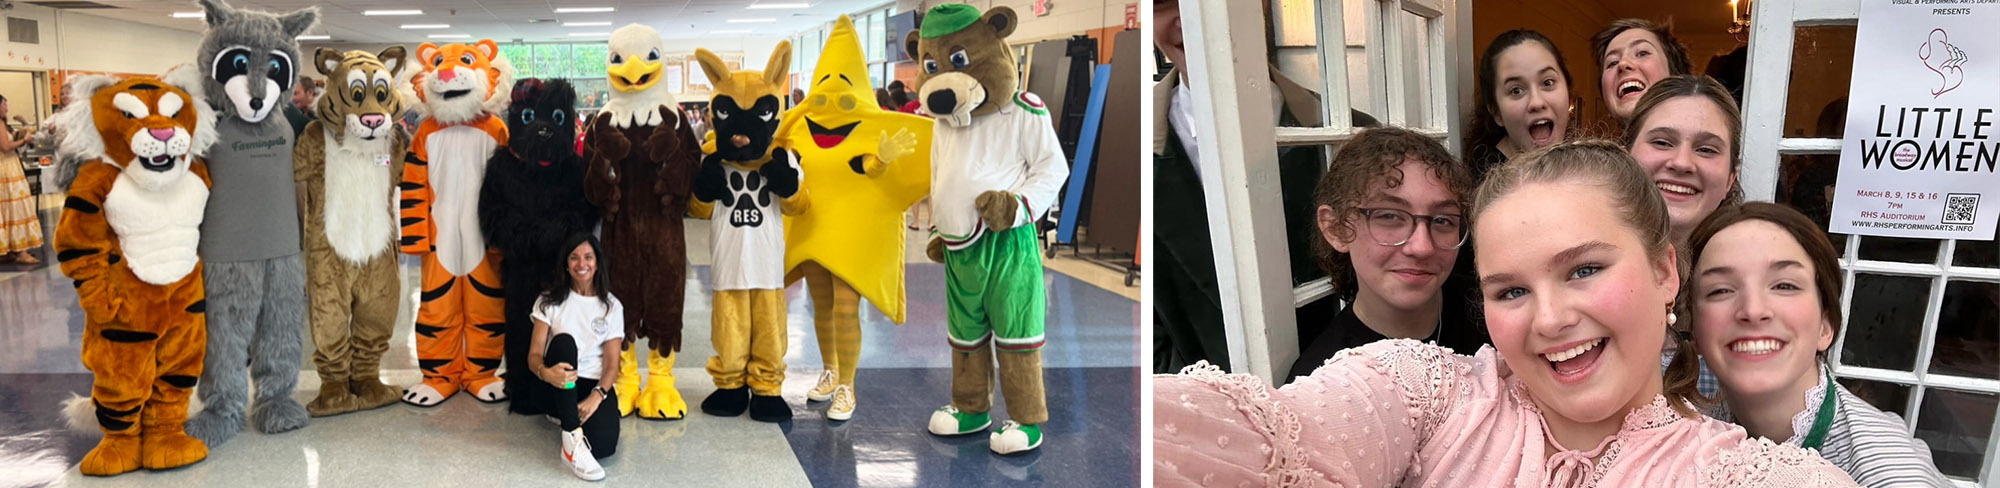 Staff dressed up as mascots next to student with adult next to selfie of girls in Little Women